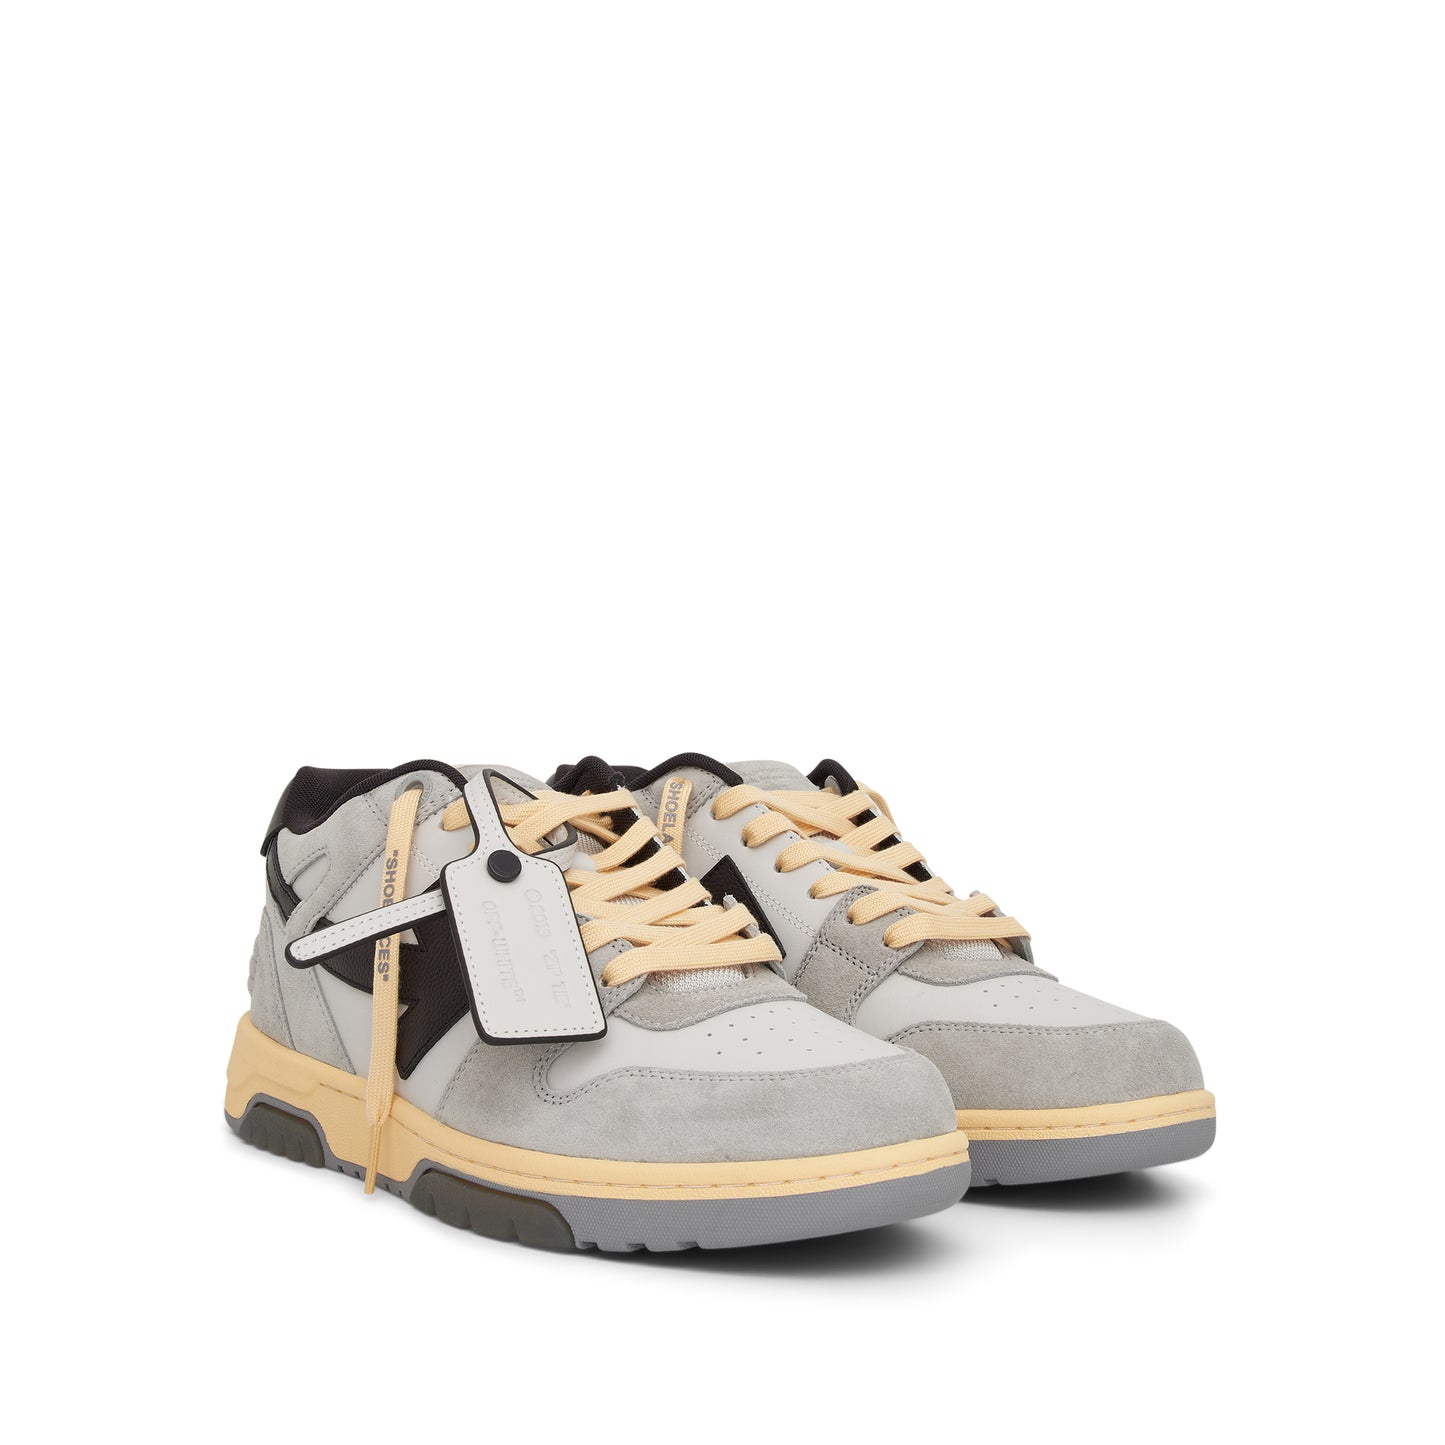 Out of Office Calf Leather Suede Sneaker in Light Grey